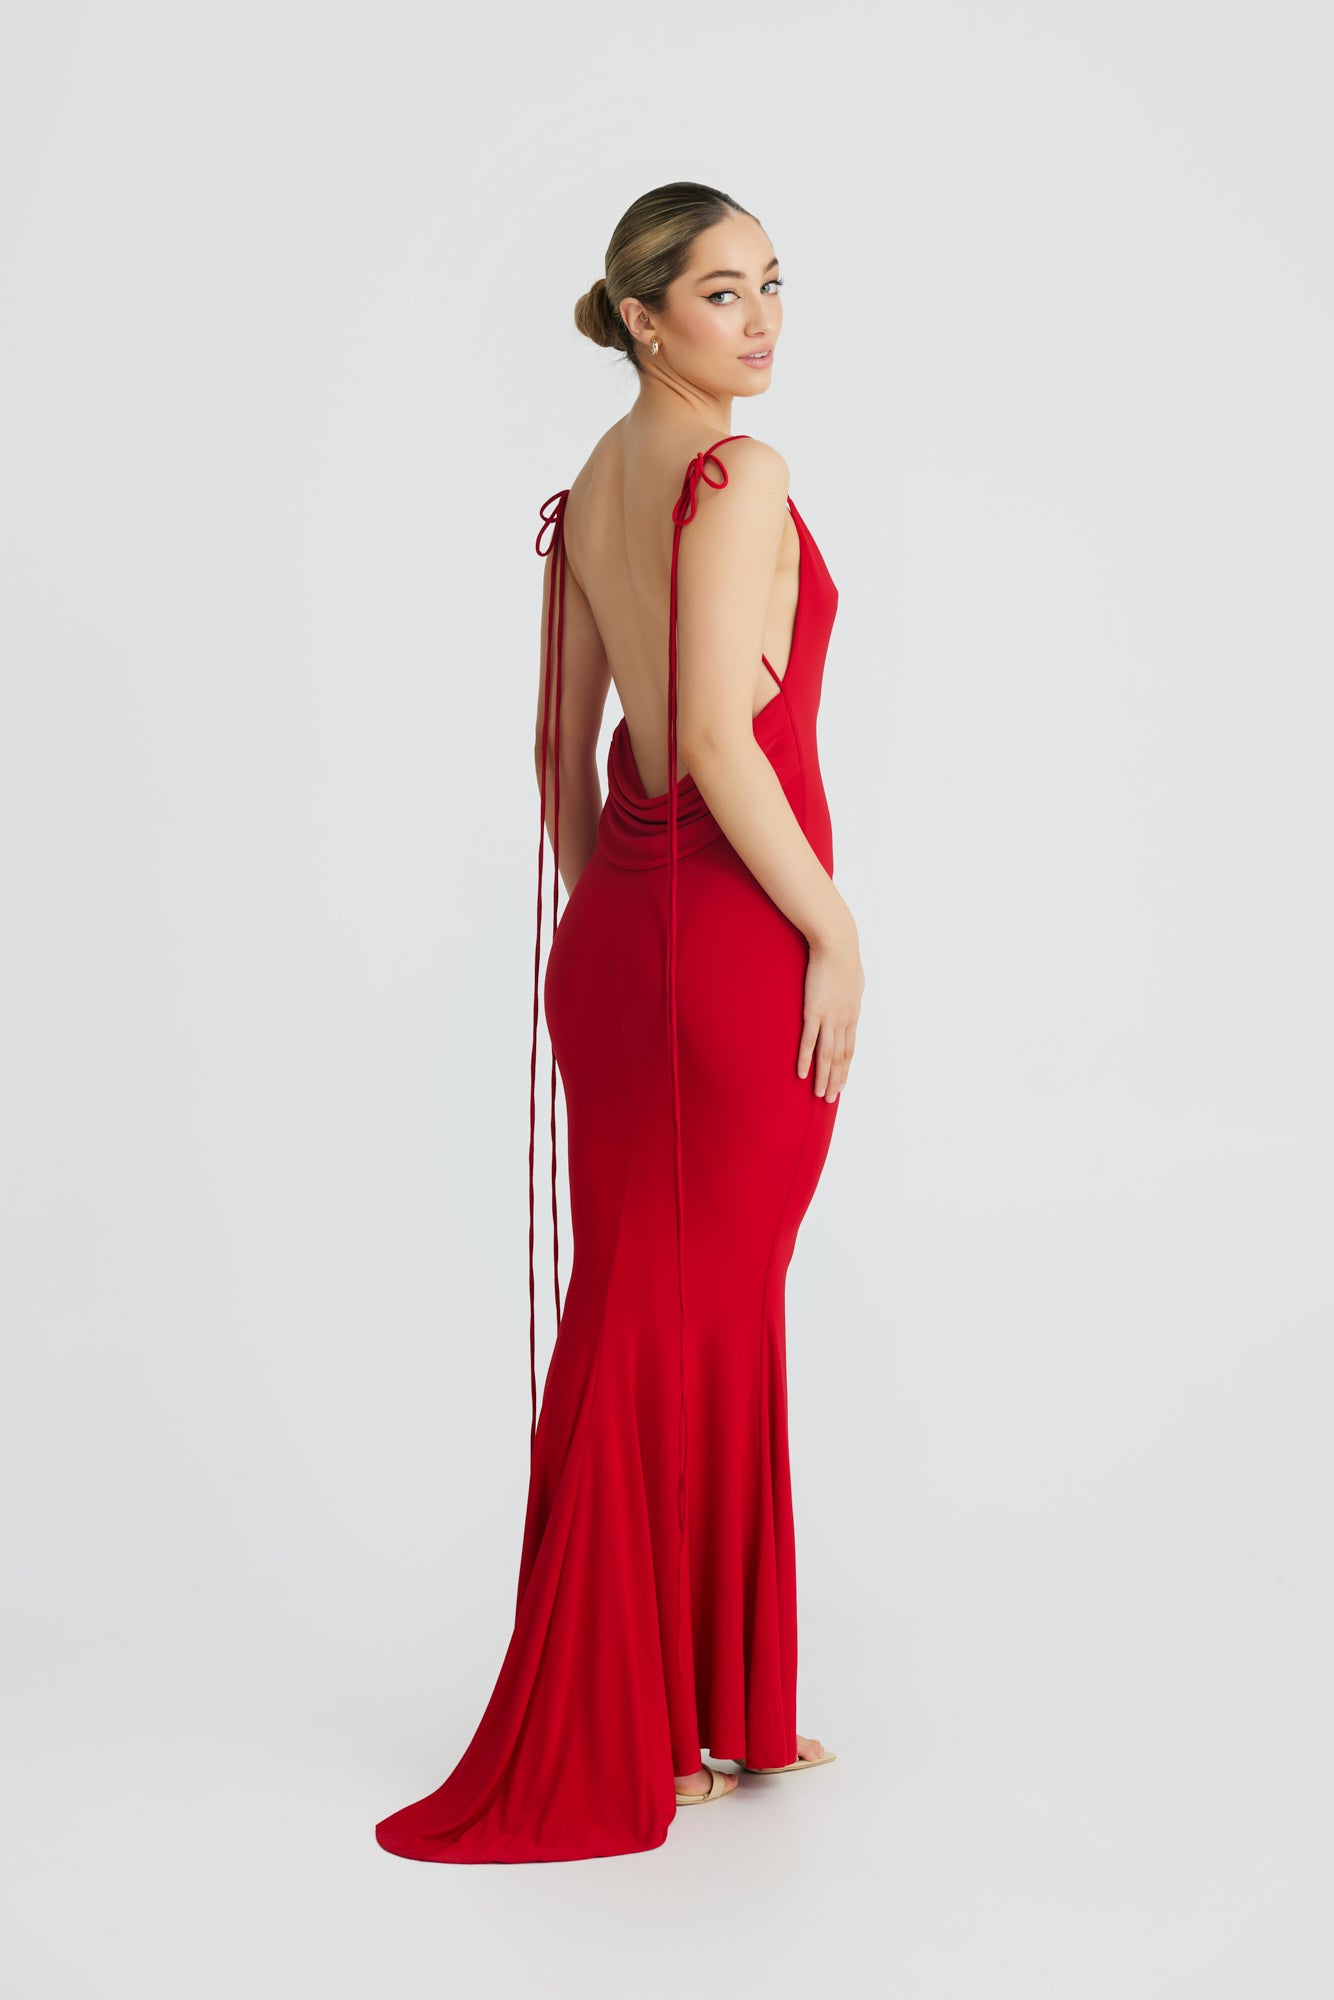 CRISTINA MERMAID GOWN - RED